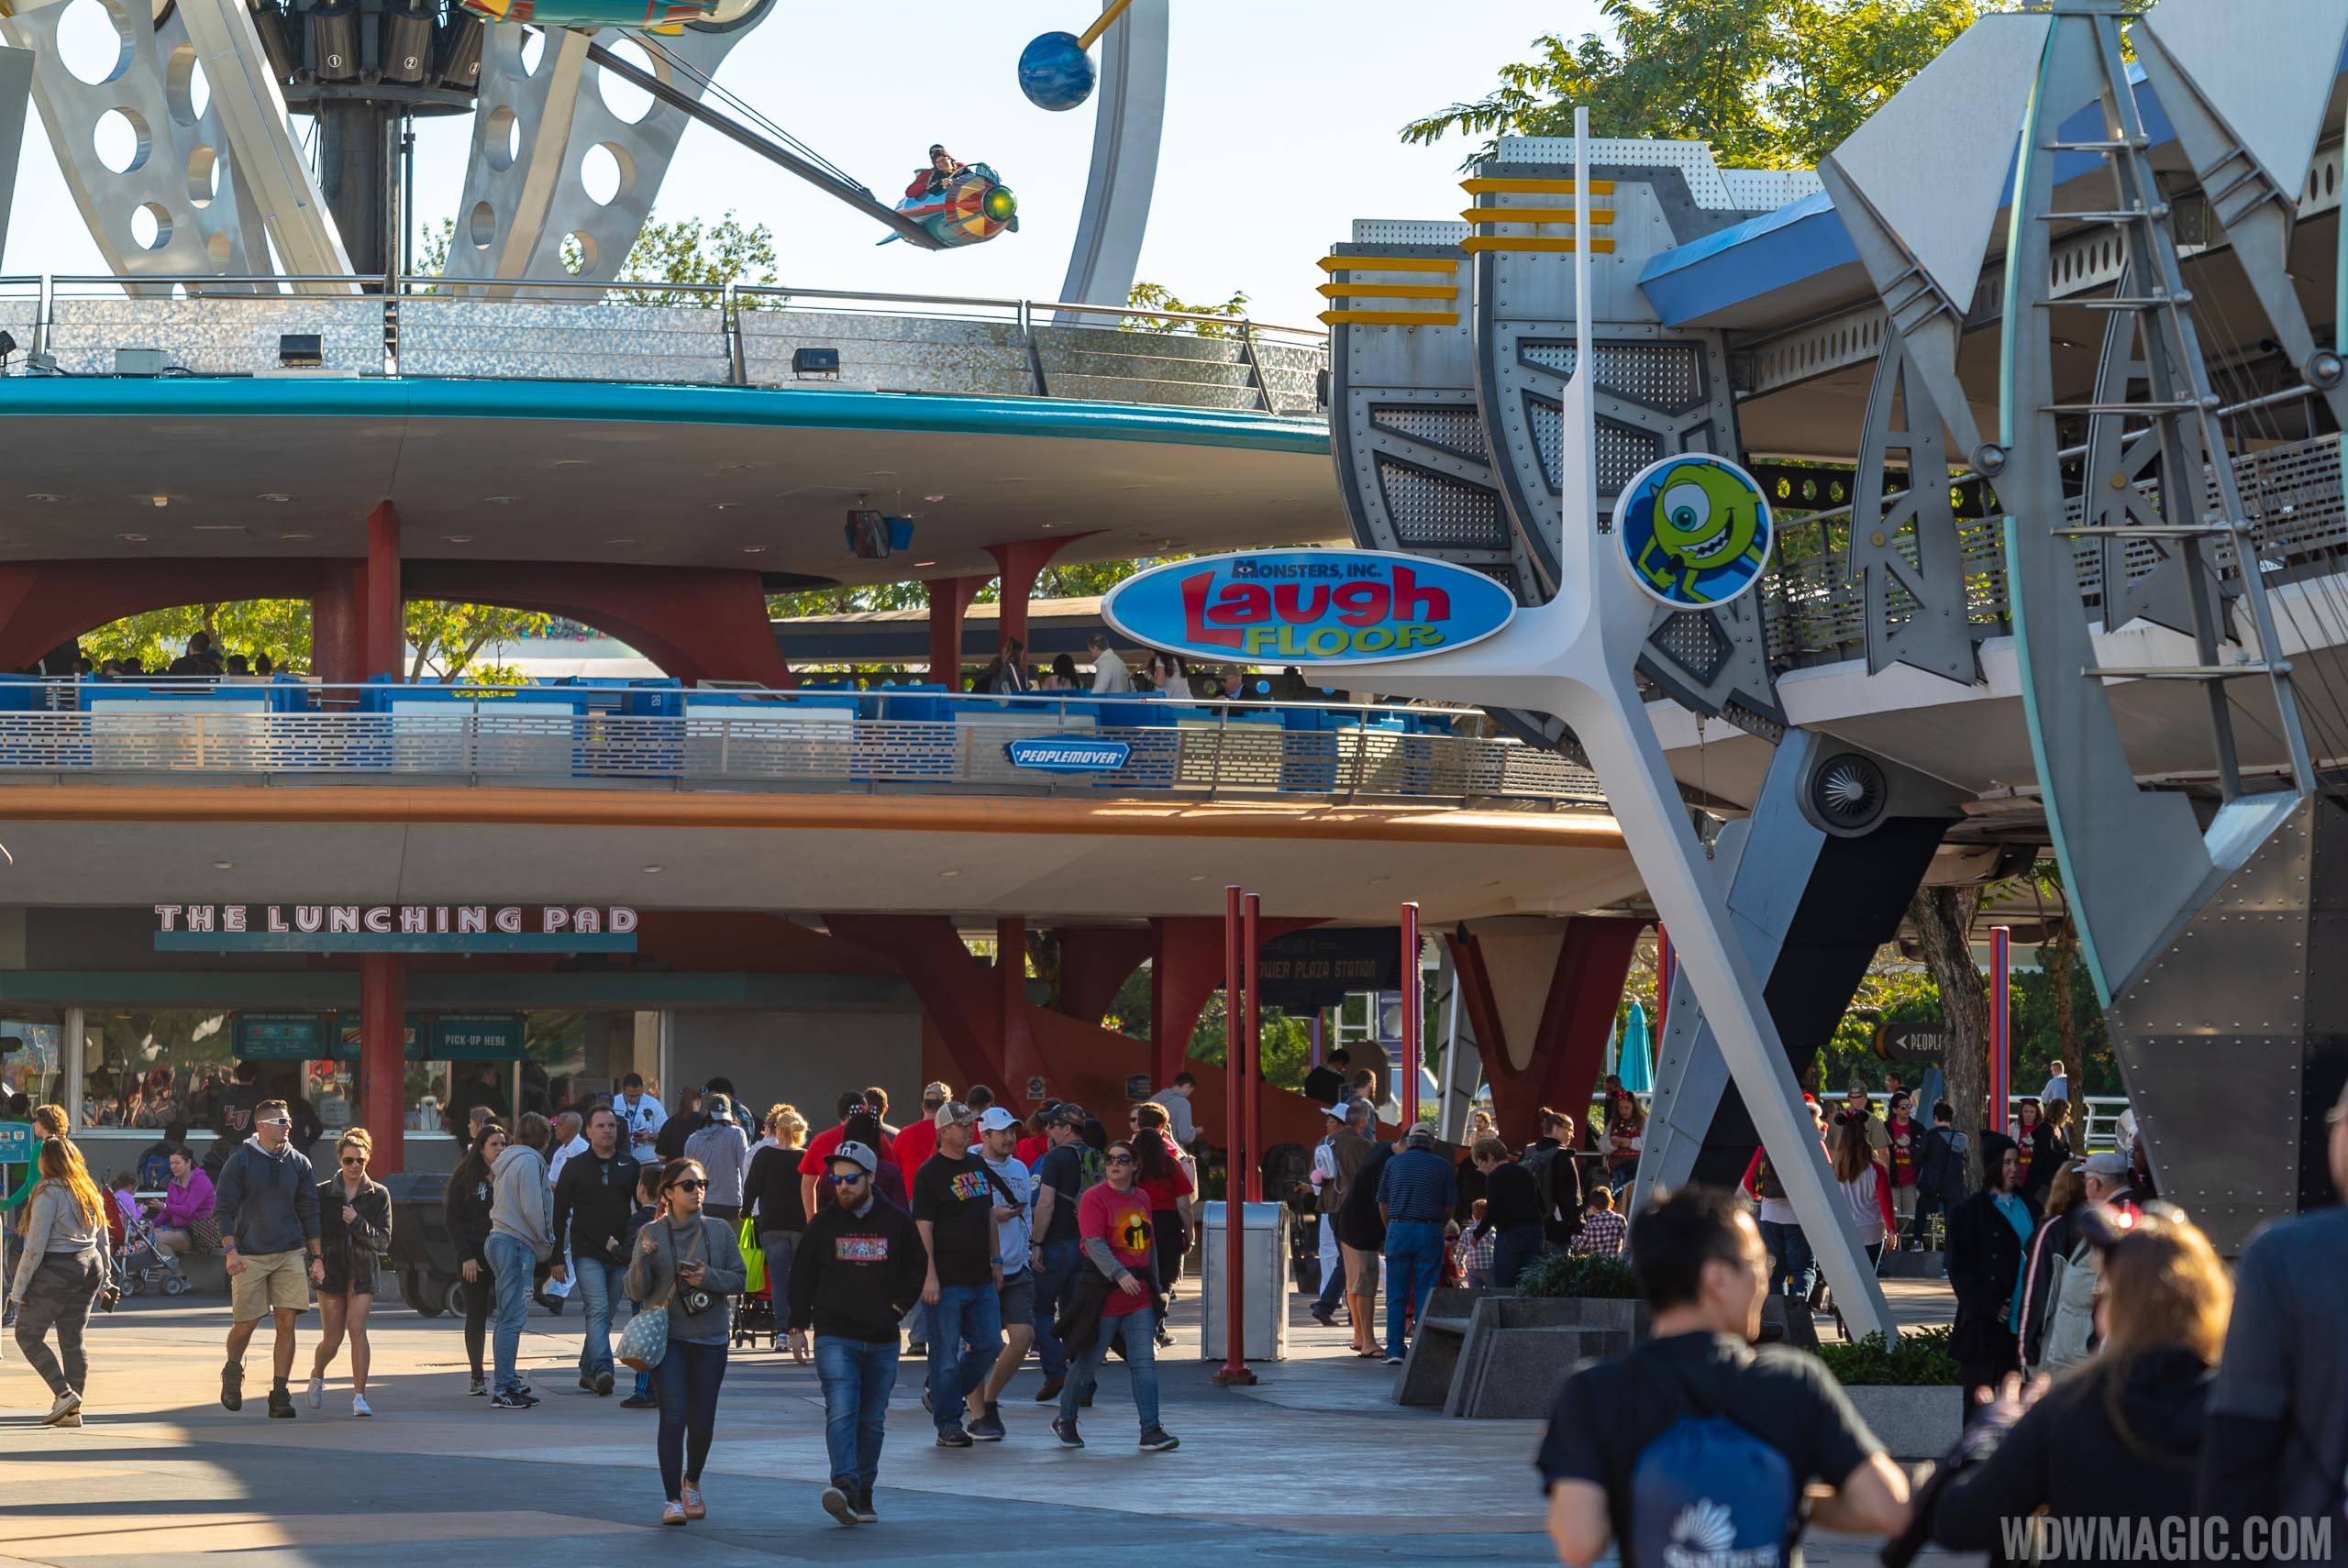 PHOTOS - Old is now new again in Tomorrowland